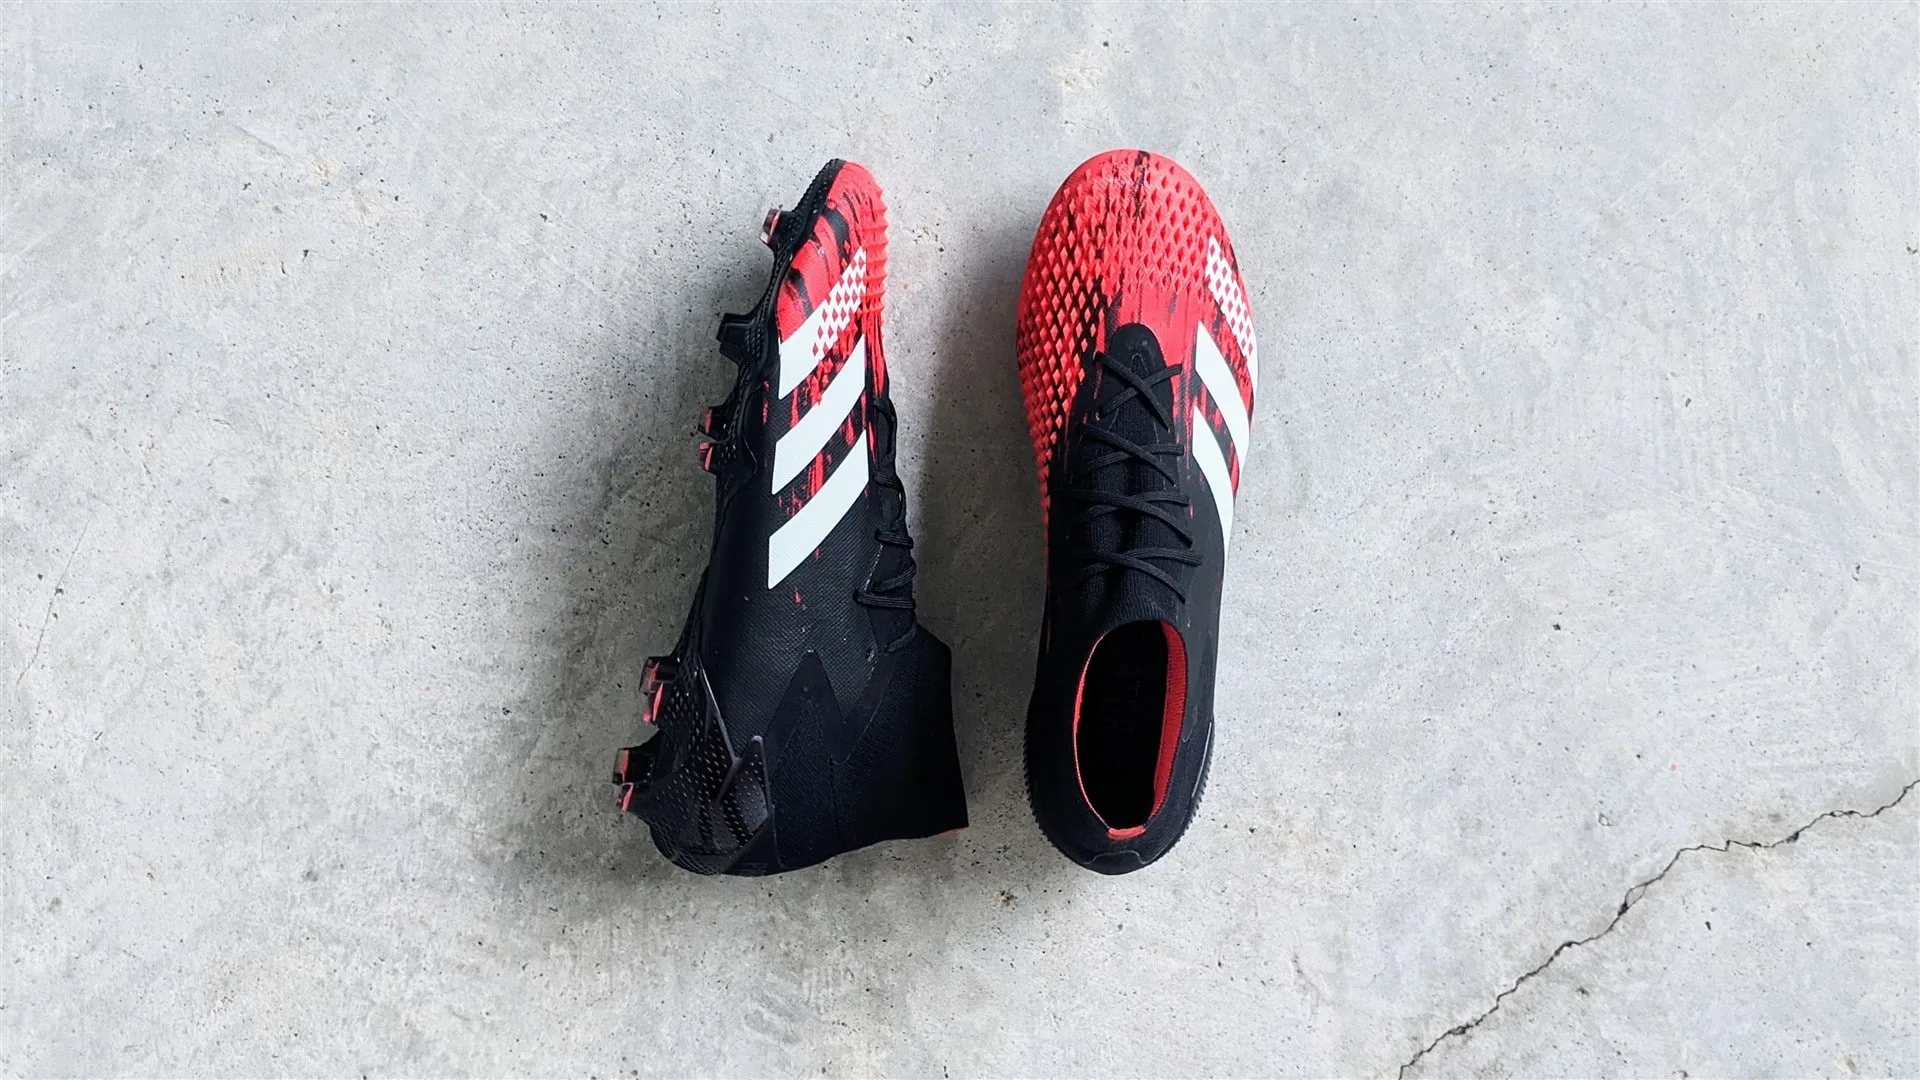 adidas Predator 20.1 Review: Unstoppable grip but requires breaking in